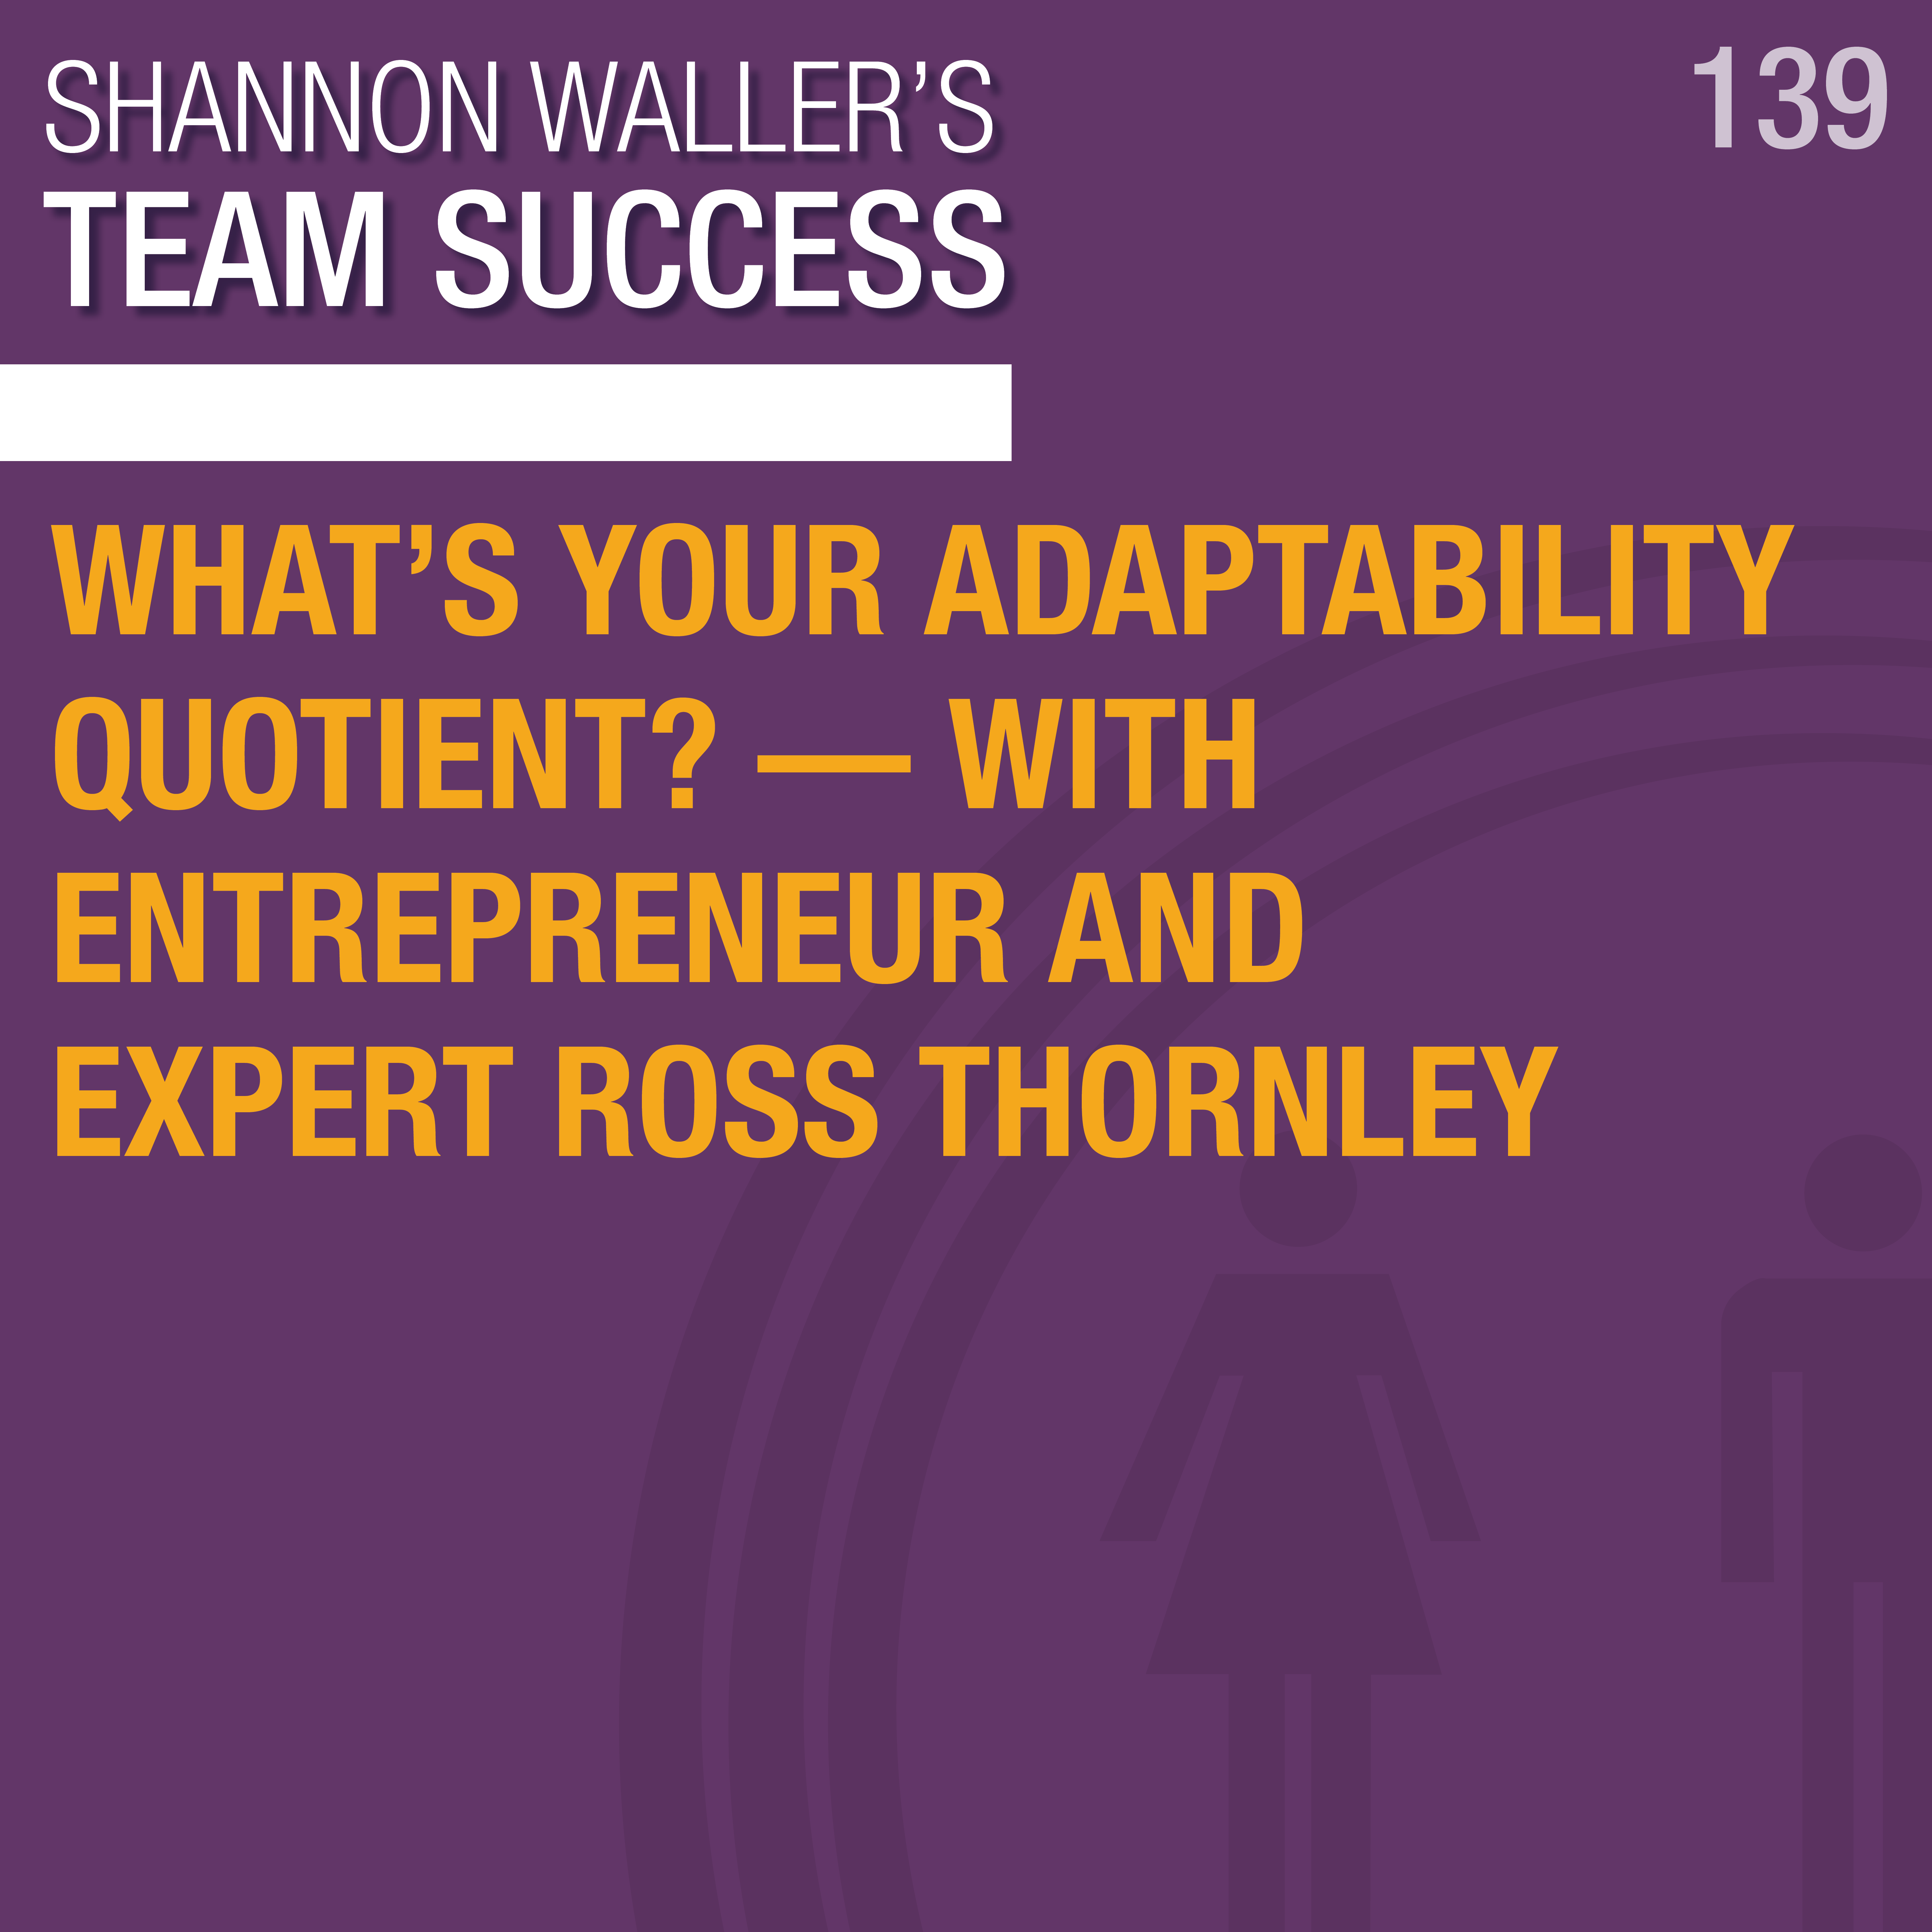 What’s Your Adaptability Quotient? – With Entrepreneur And Expert Ross Thornley